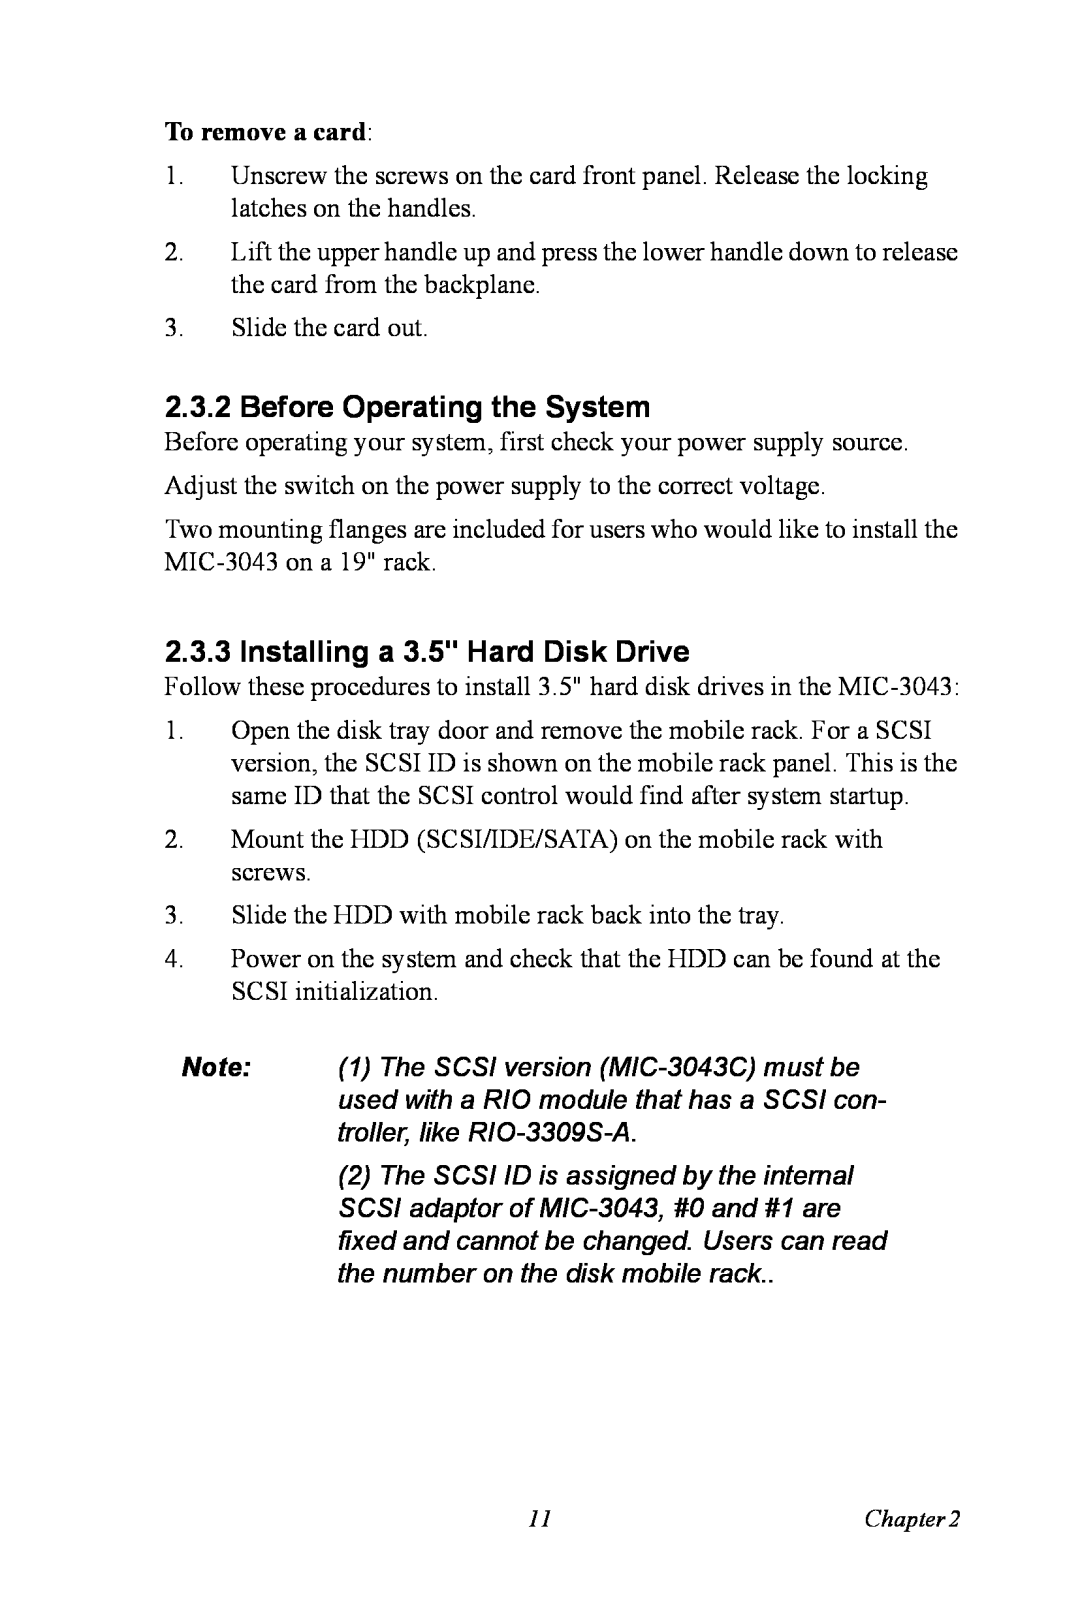 Advantech MIC-3043 user manual Before Operating the System, Installing a 3.5 Hard Disk Drive, To remove a card 